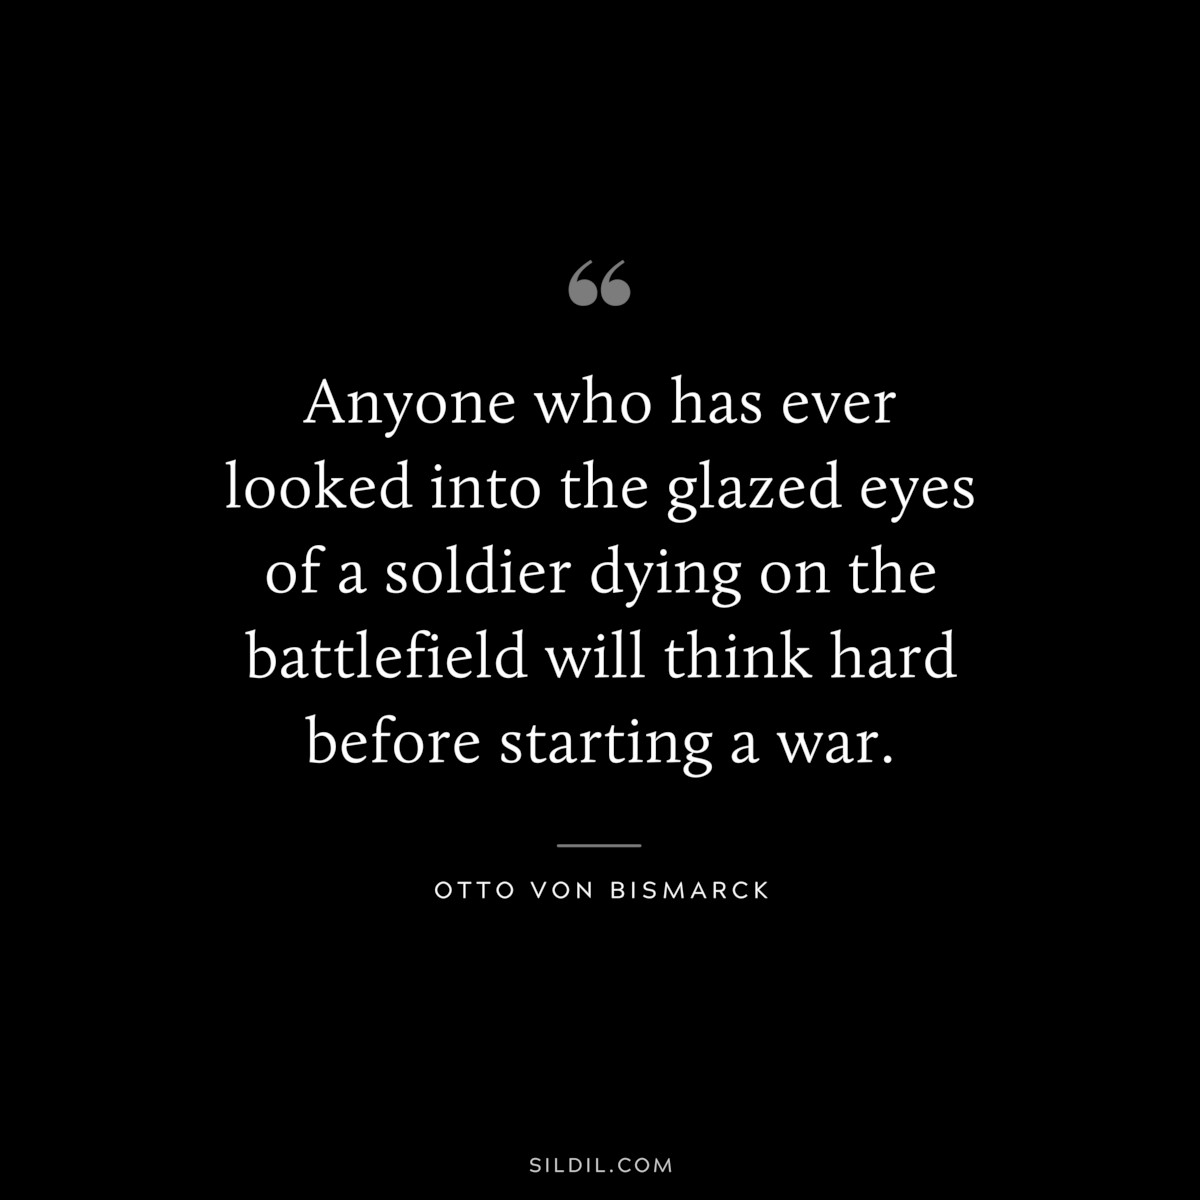 Anyone who has ever looked into the glazed eyes of a soldier dying on the battlefield will think hard before starting a war. ― Otto von Bismarck